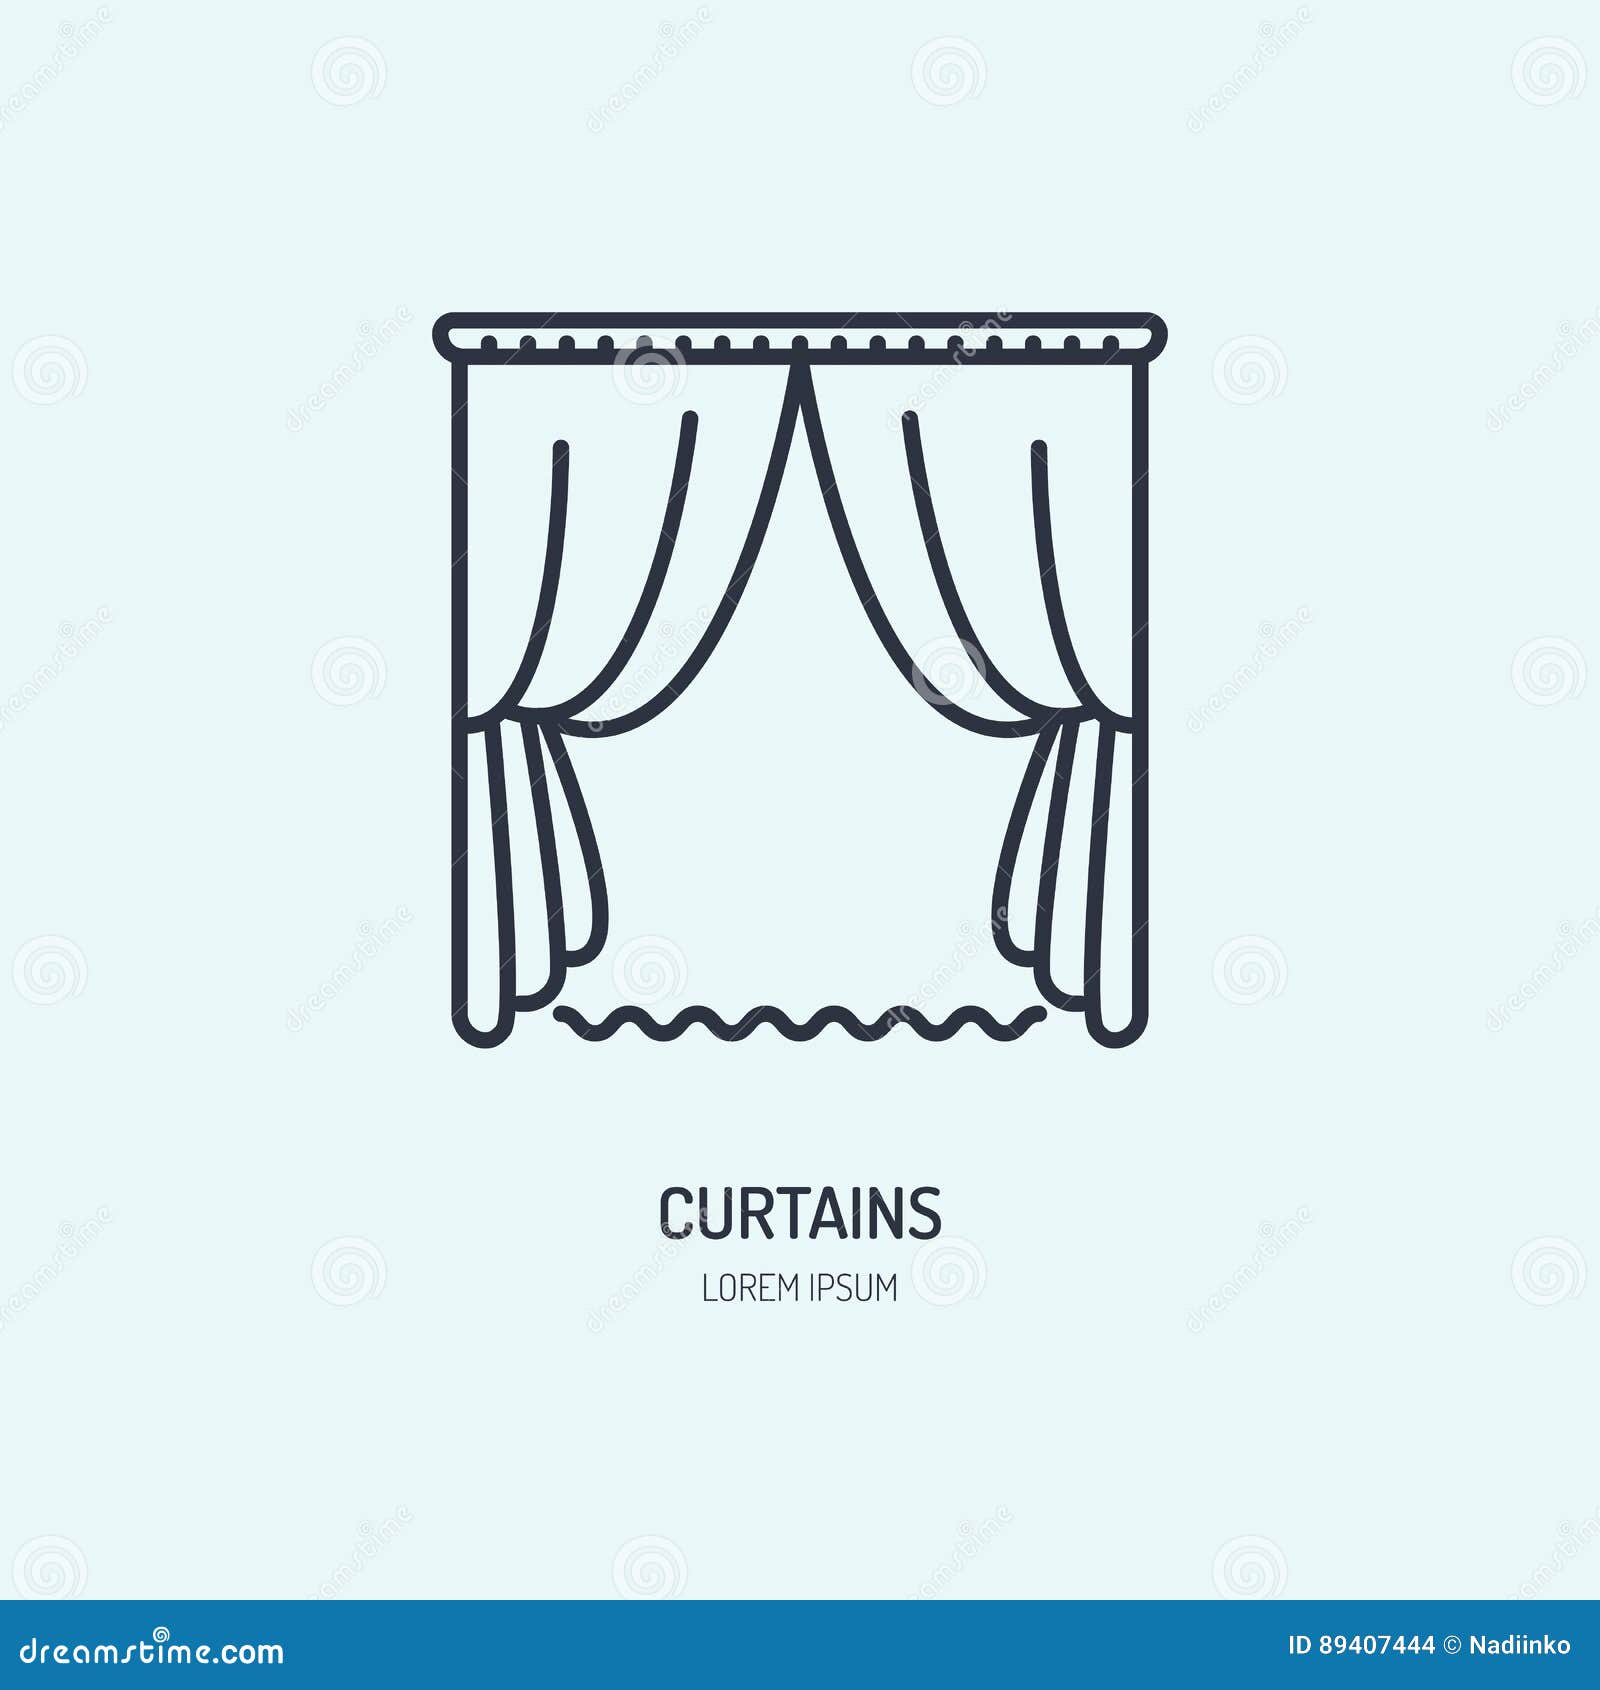 Customizing textiles Signs for home Print curtain Letter decor on the linen panel Monogram for linen curtain Logo textile restaurant.